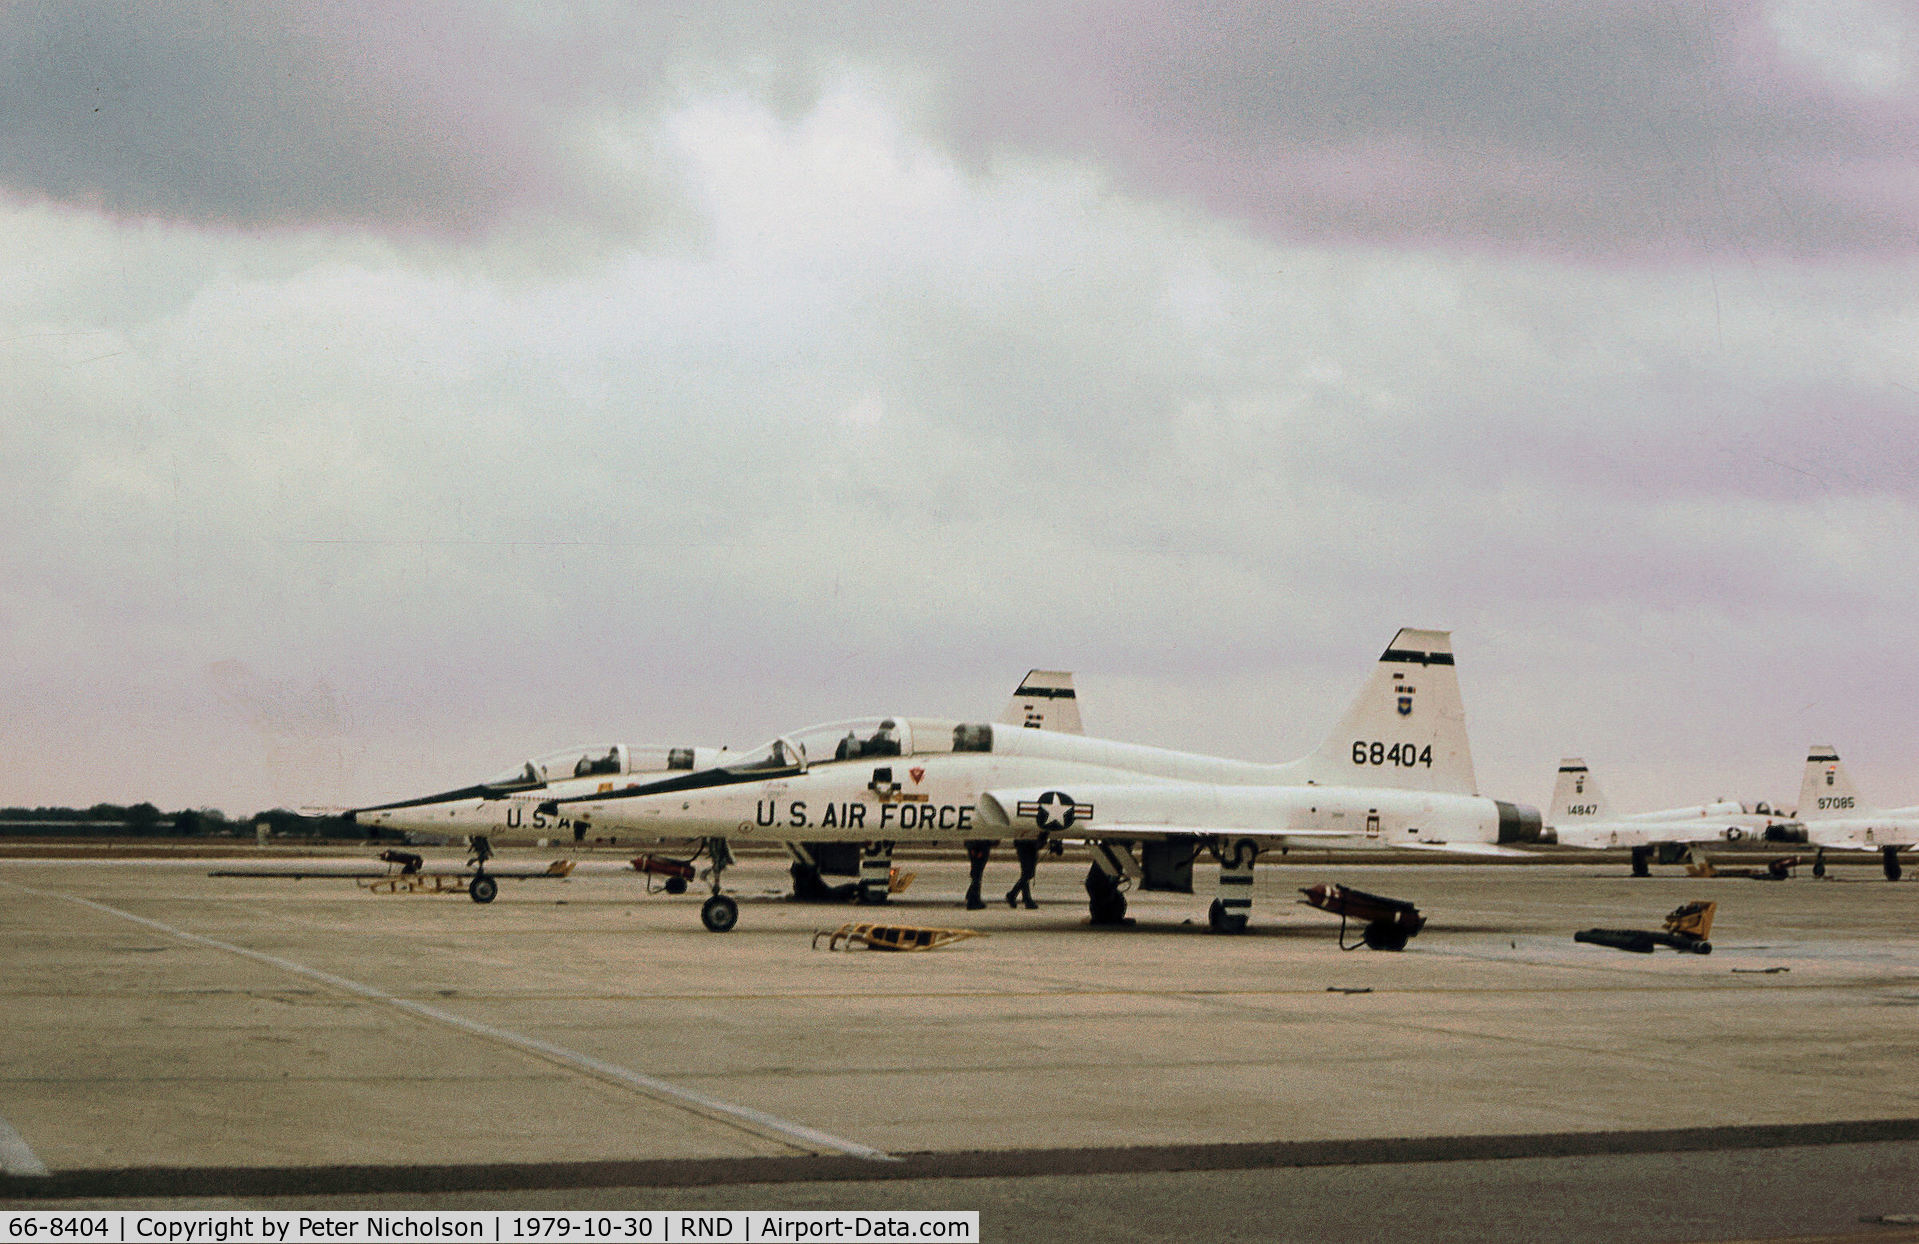 66-8404, 1966 Northrop T-38A Talon C/N N.5989, T-38A Talon of the 12th Flying Training Wing on the flight-line at Randolph AFB in November 1979.